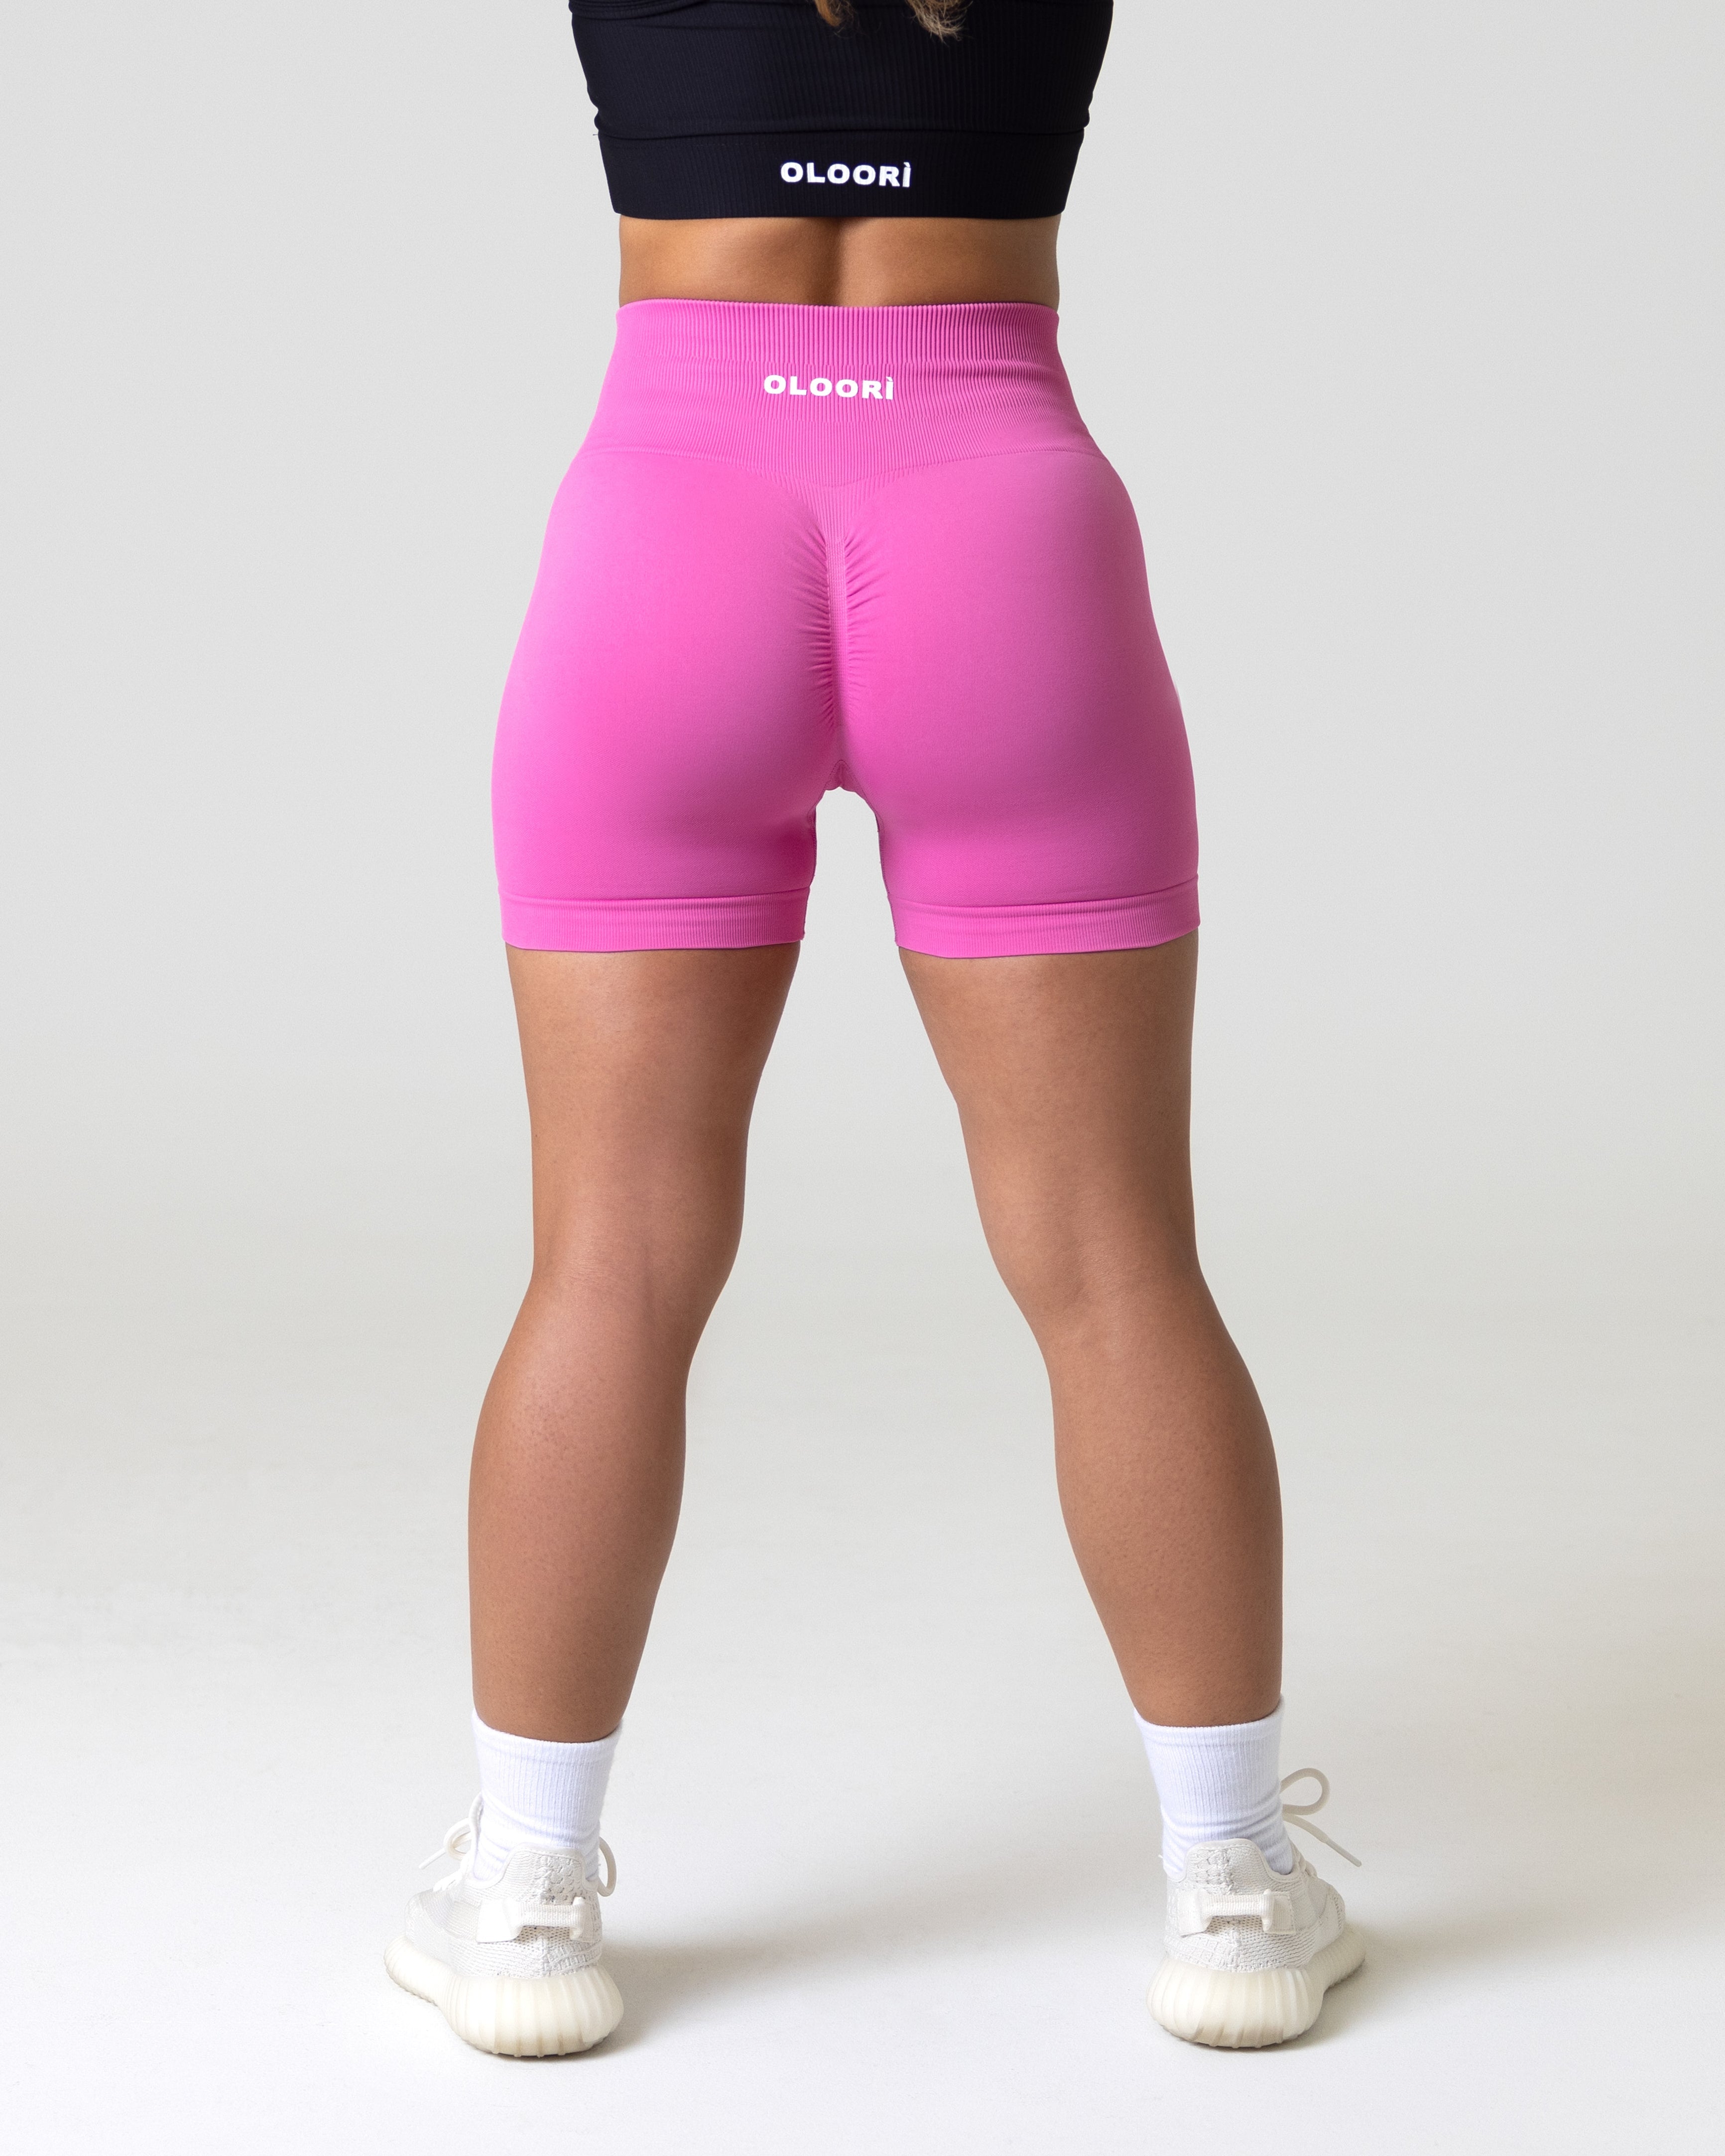  Workout Shorts For Women